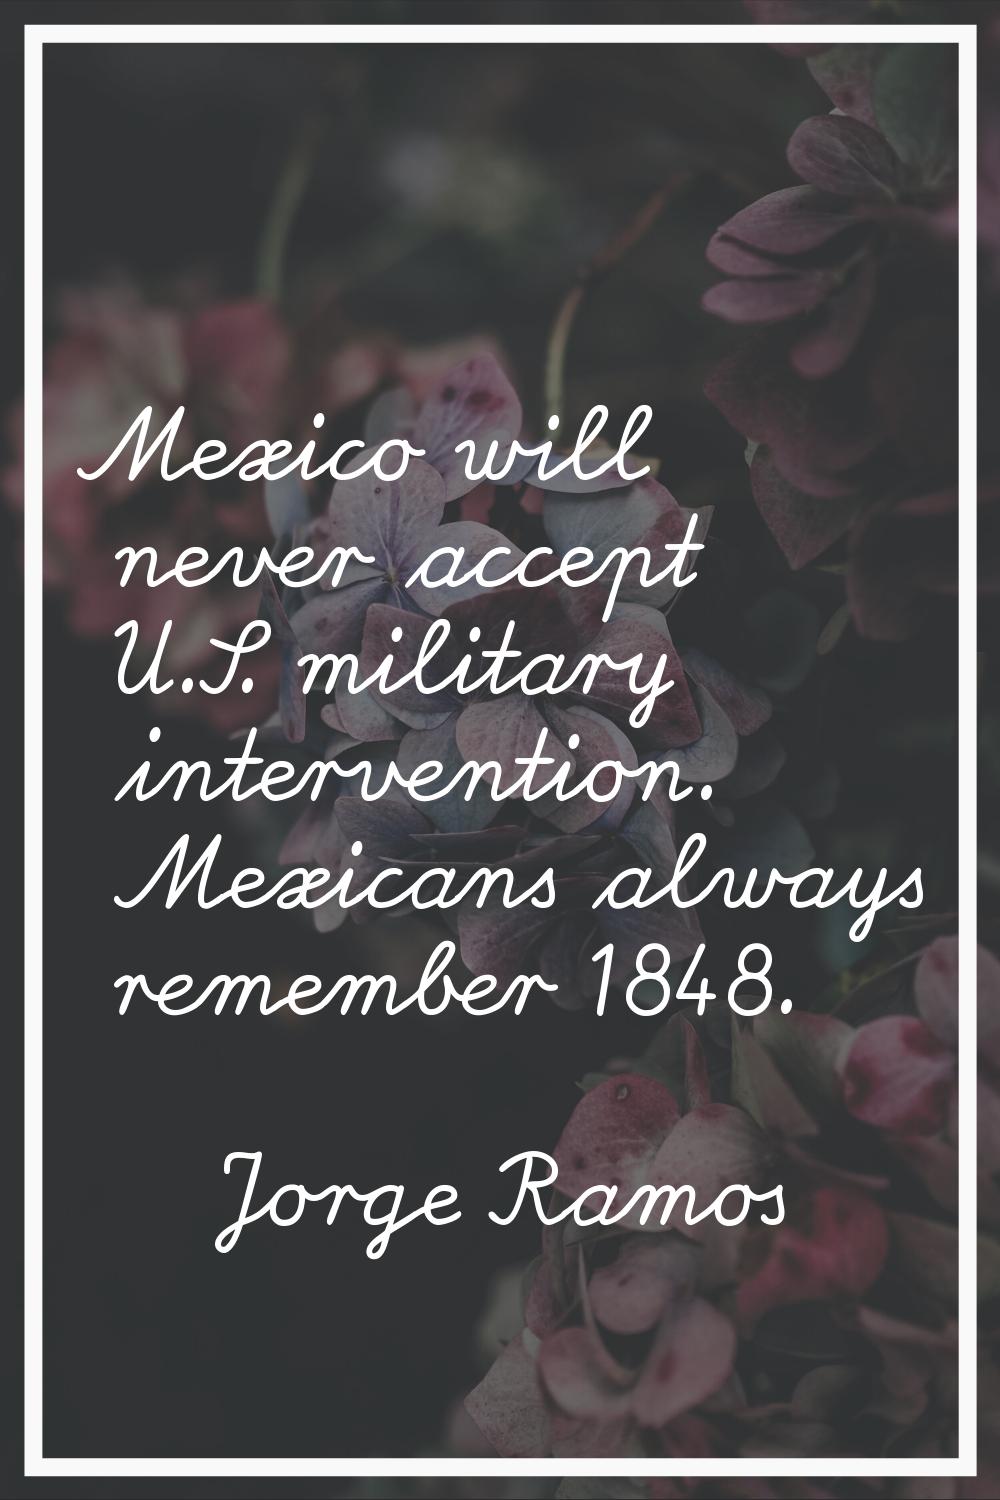 Mexico will never accept U.S. military intervention. Mexicans always remember 1848.